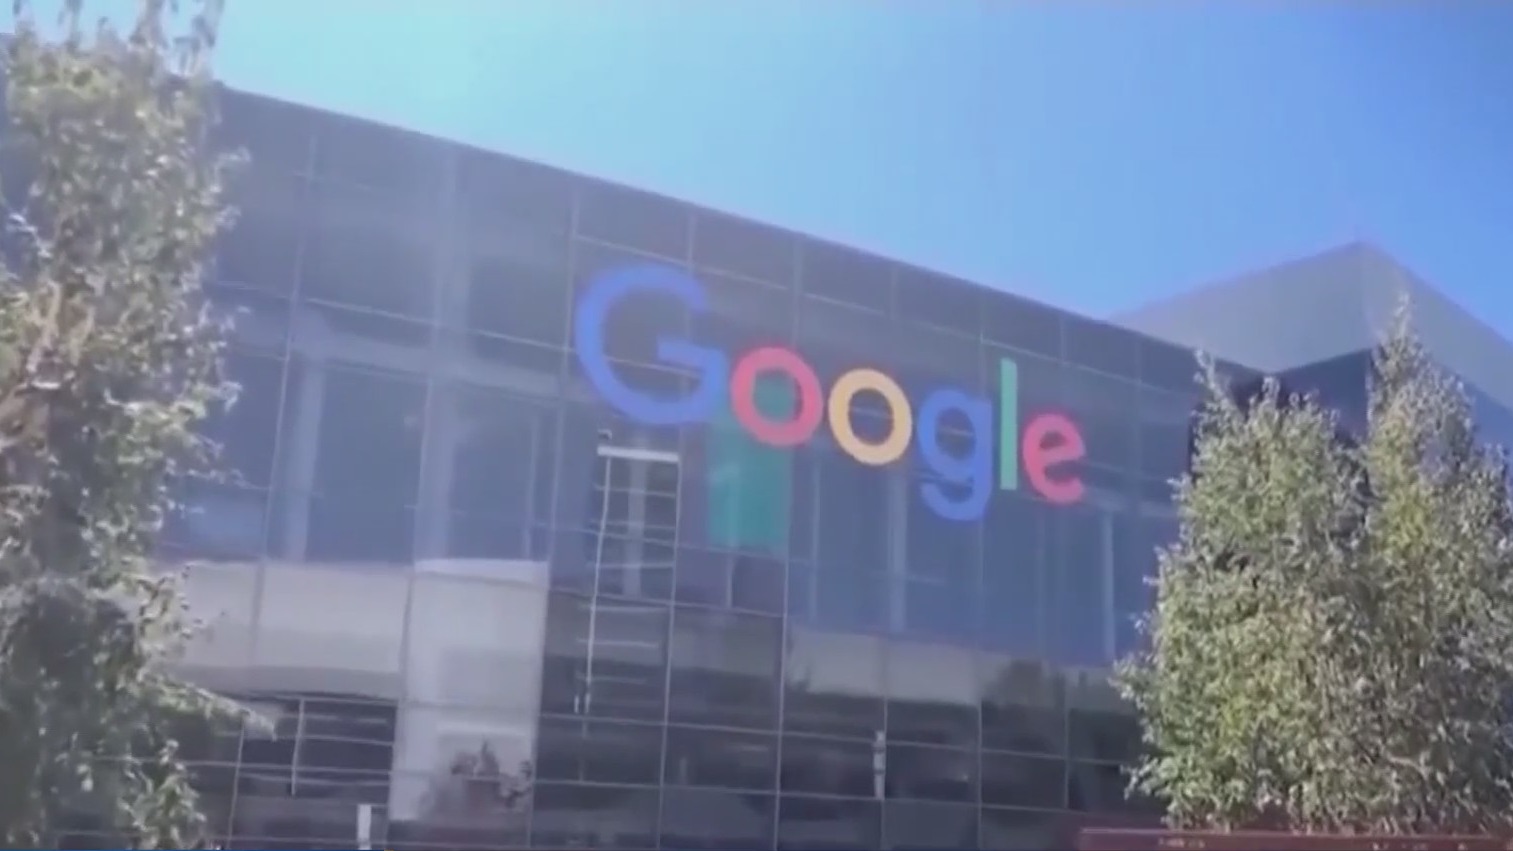 Google Settles With 6 Engineers Who Alleged They Faced Retaliation For Organizing